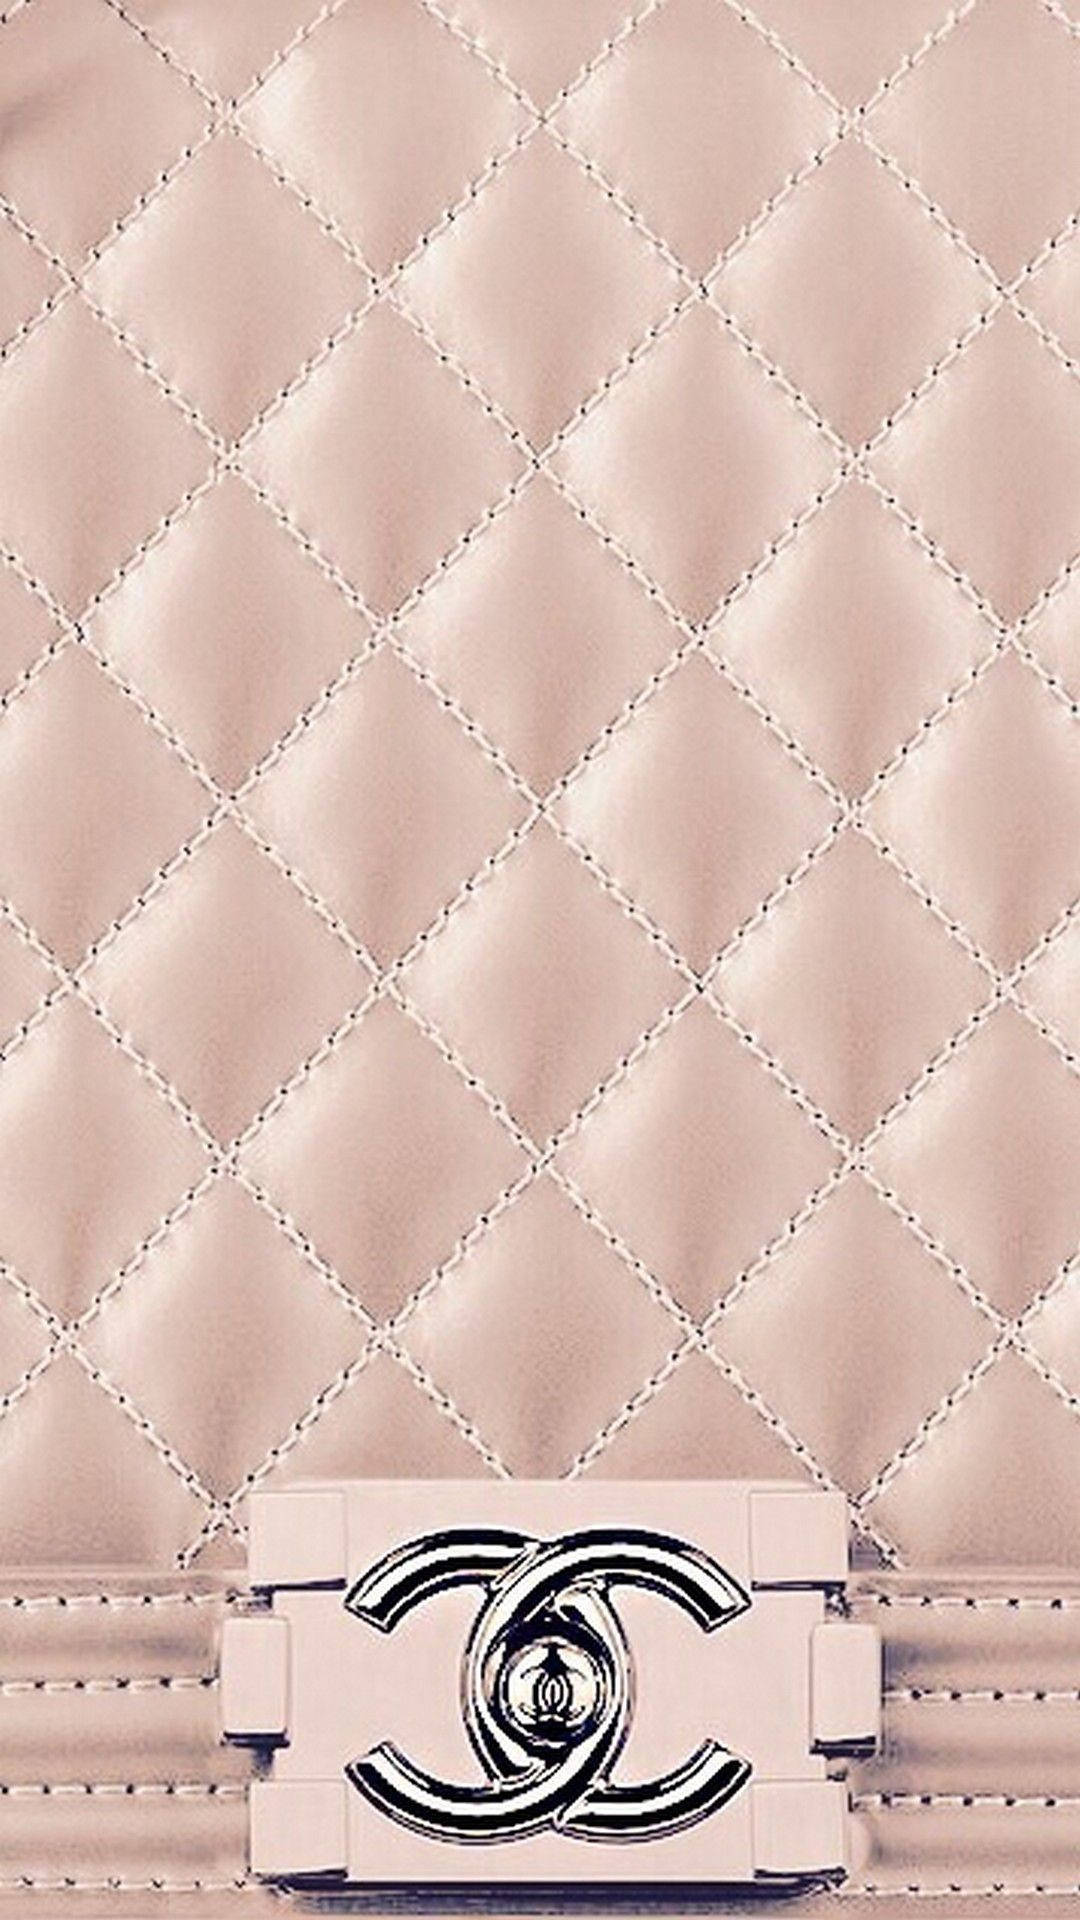 Chanel quilted lambskin leather bag - Rose gold